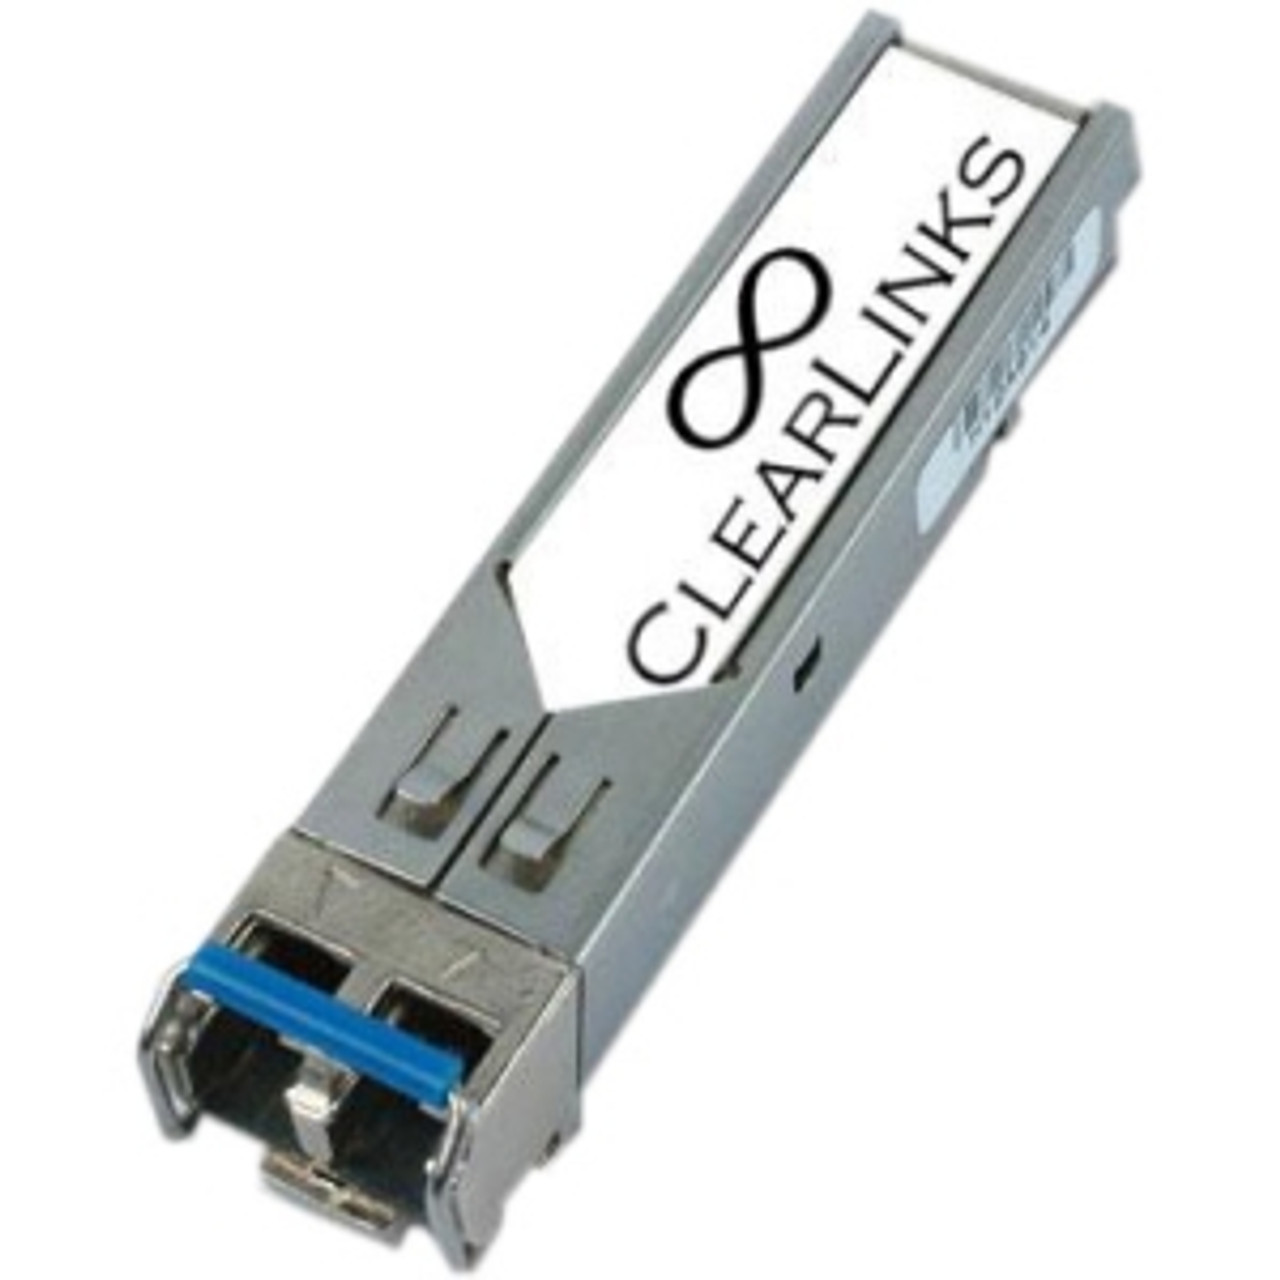 GLC-BX-D-CL ClearLinks 1Gbps 1000Base-BX-D Single-mode Fiber 10km 1490nmTX/1310nmRX LC Connector SFP Transceiver Module for Cisco Compatible